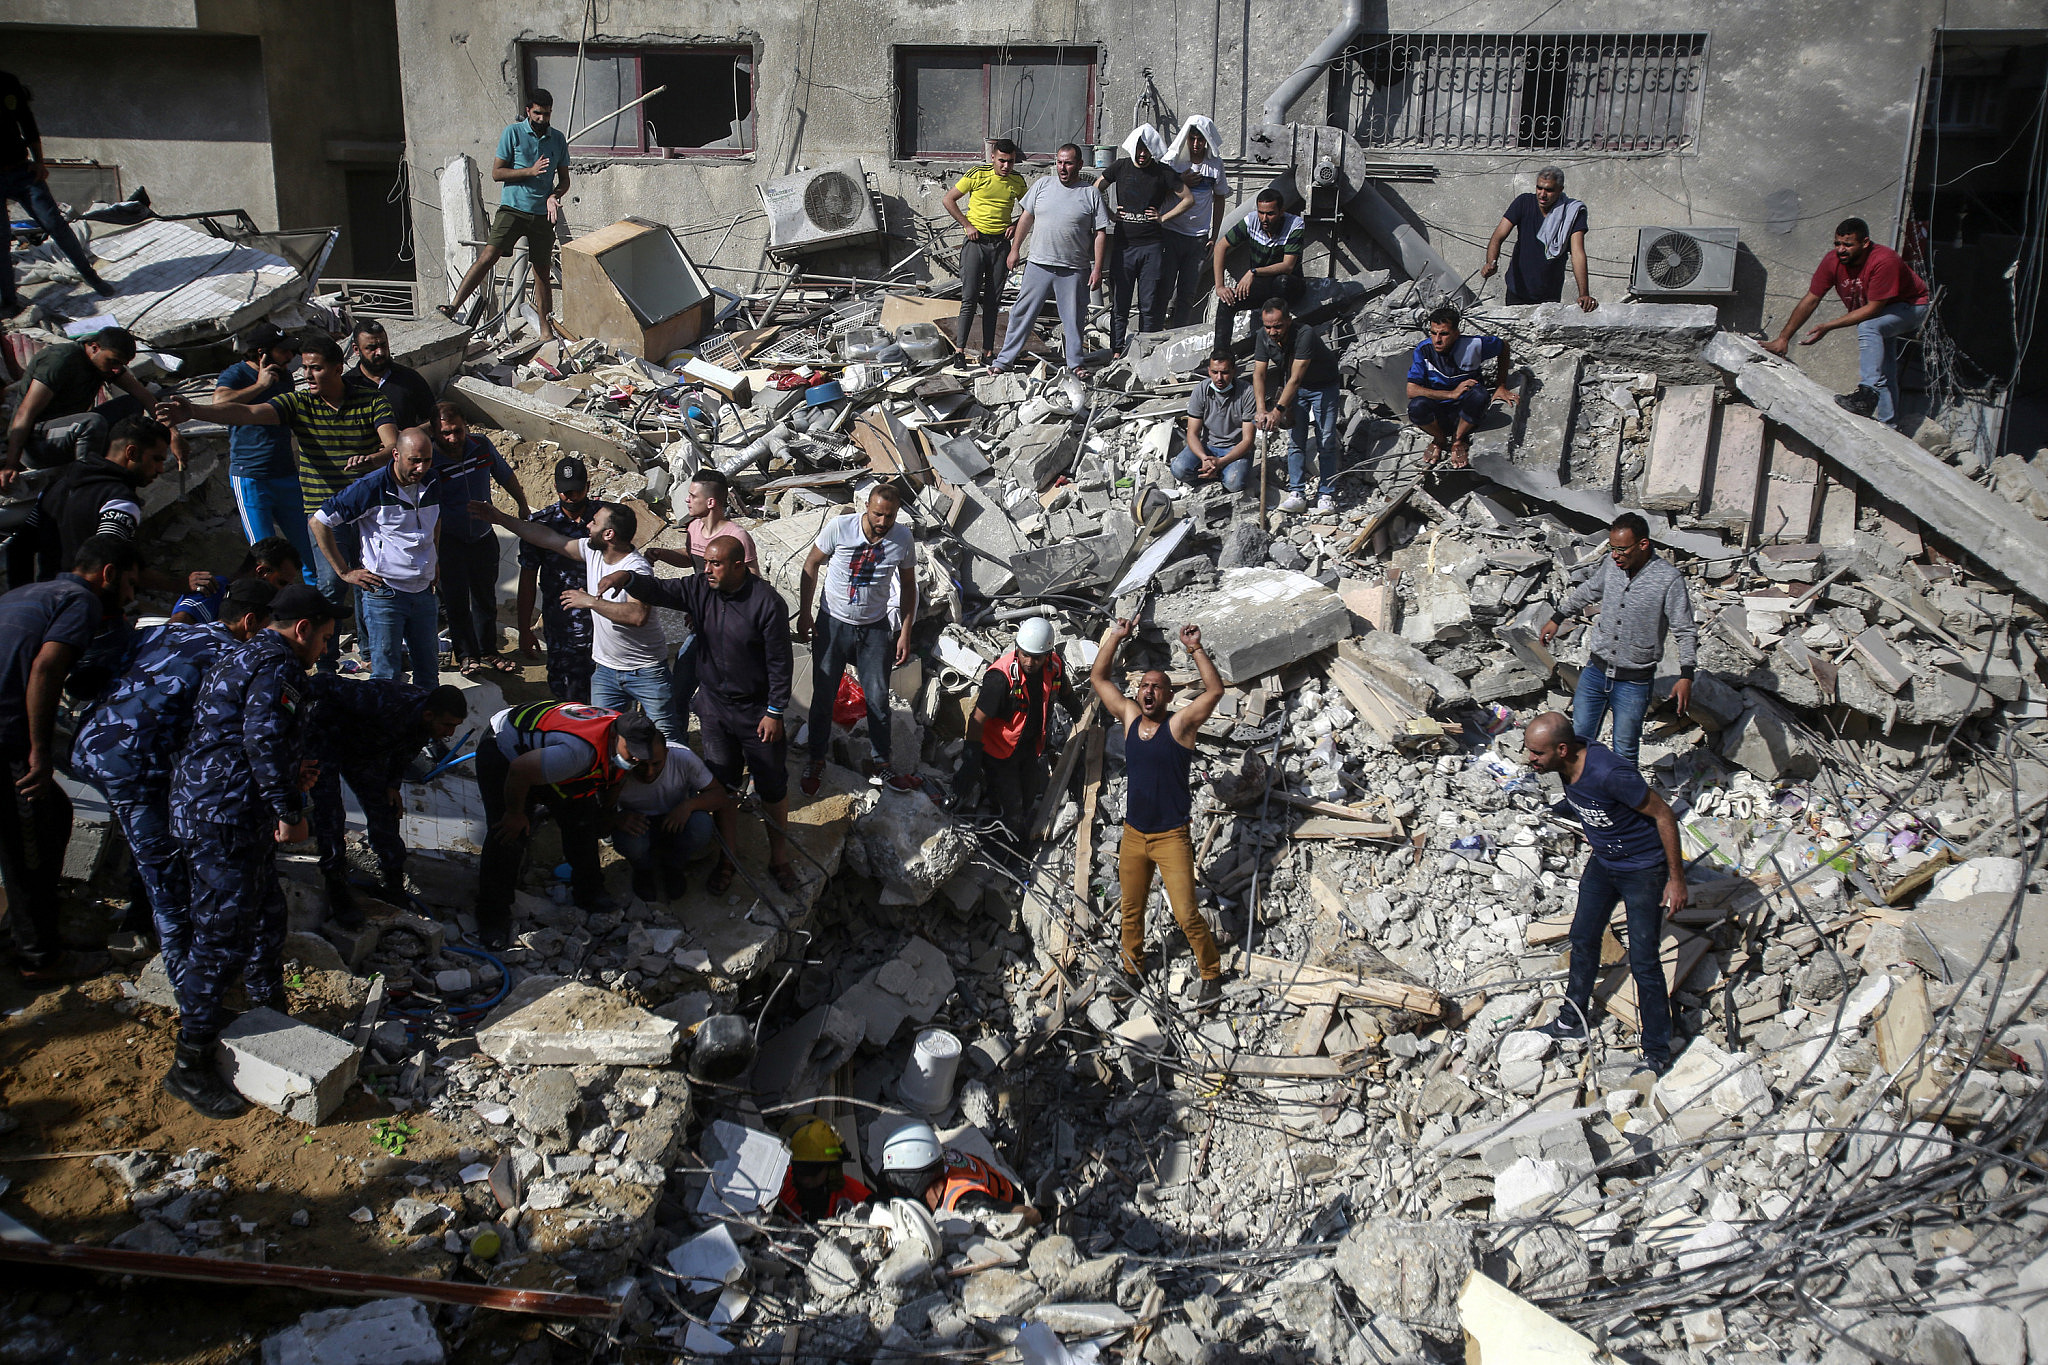 Palestinian rescue workers recover the bodies of victims amid rubble at the site of Israeli air strikes, Gaza City, May 16, 2021. (Atia Mohammed/Flash90)